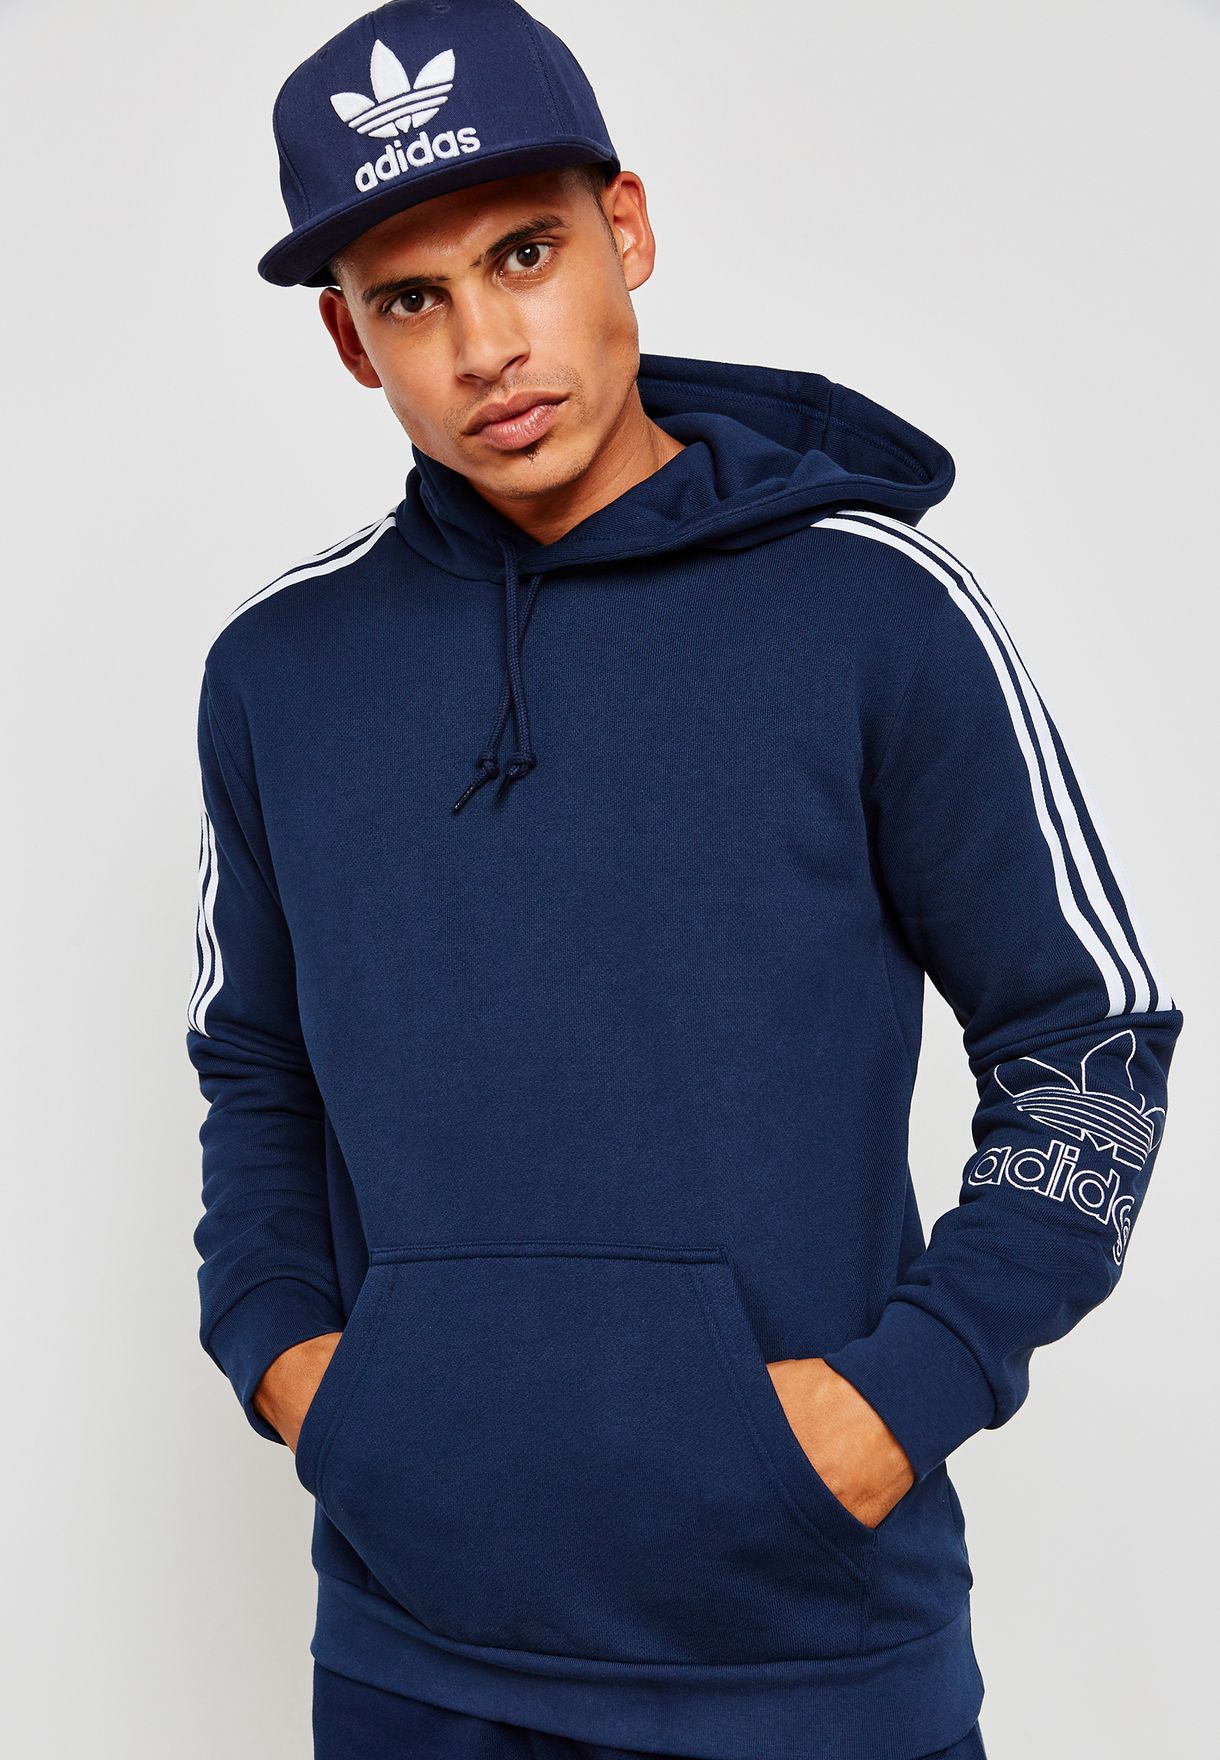 adidas outline sweater